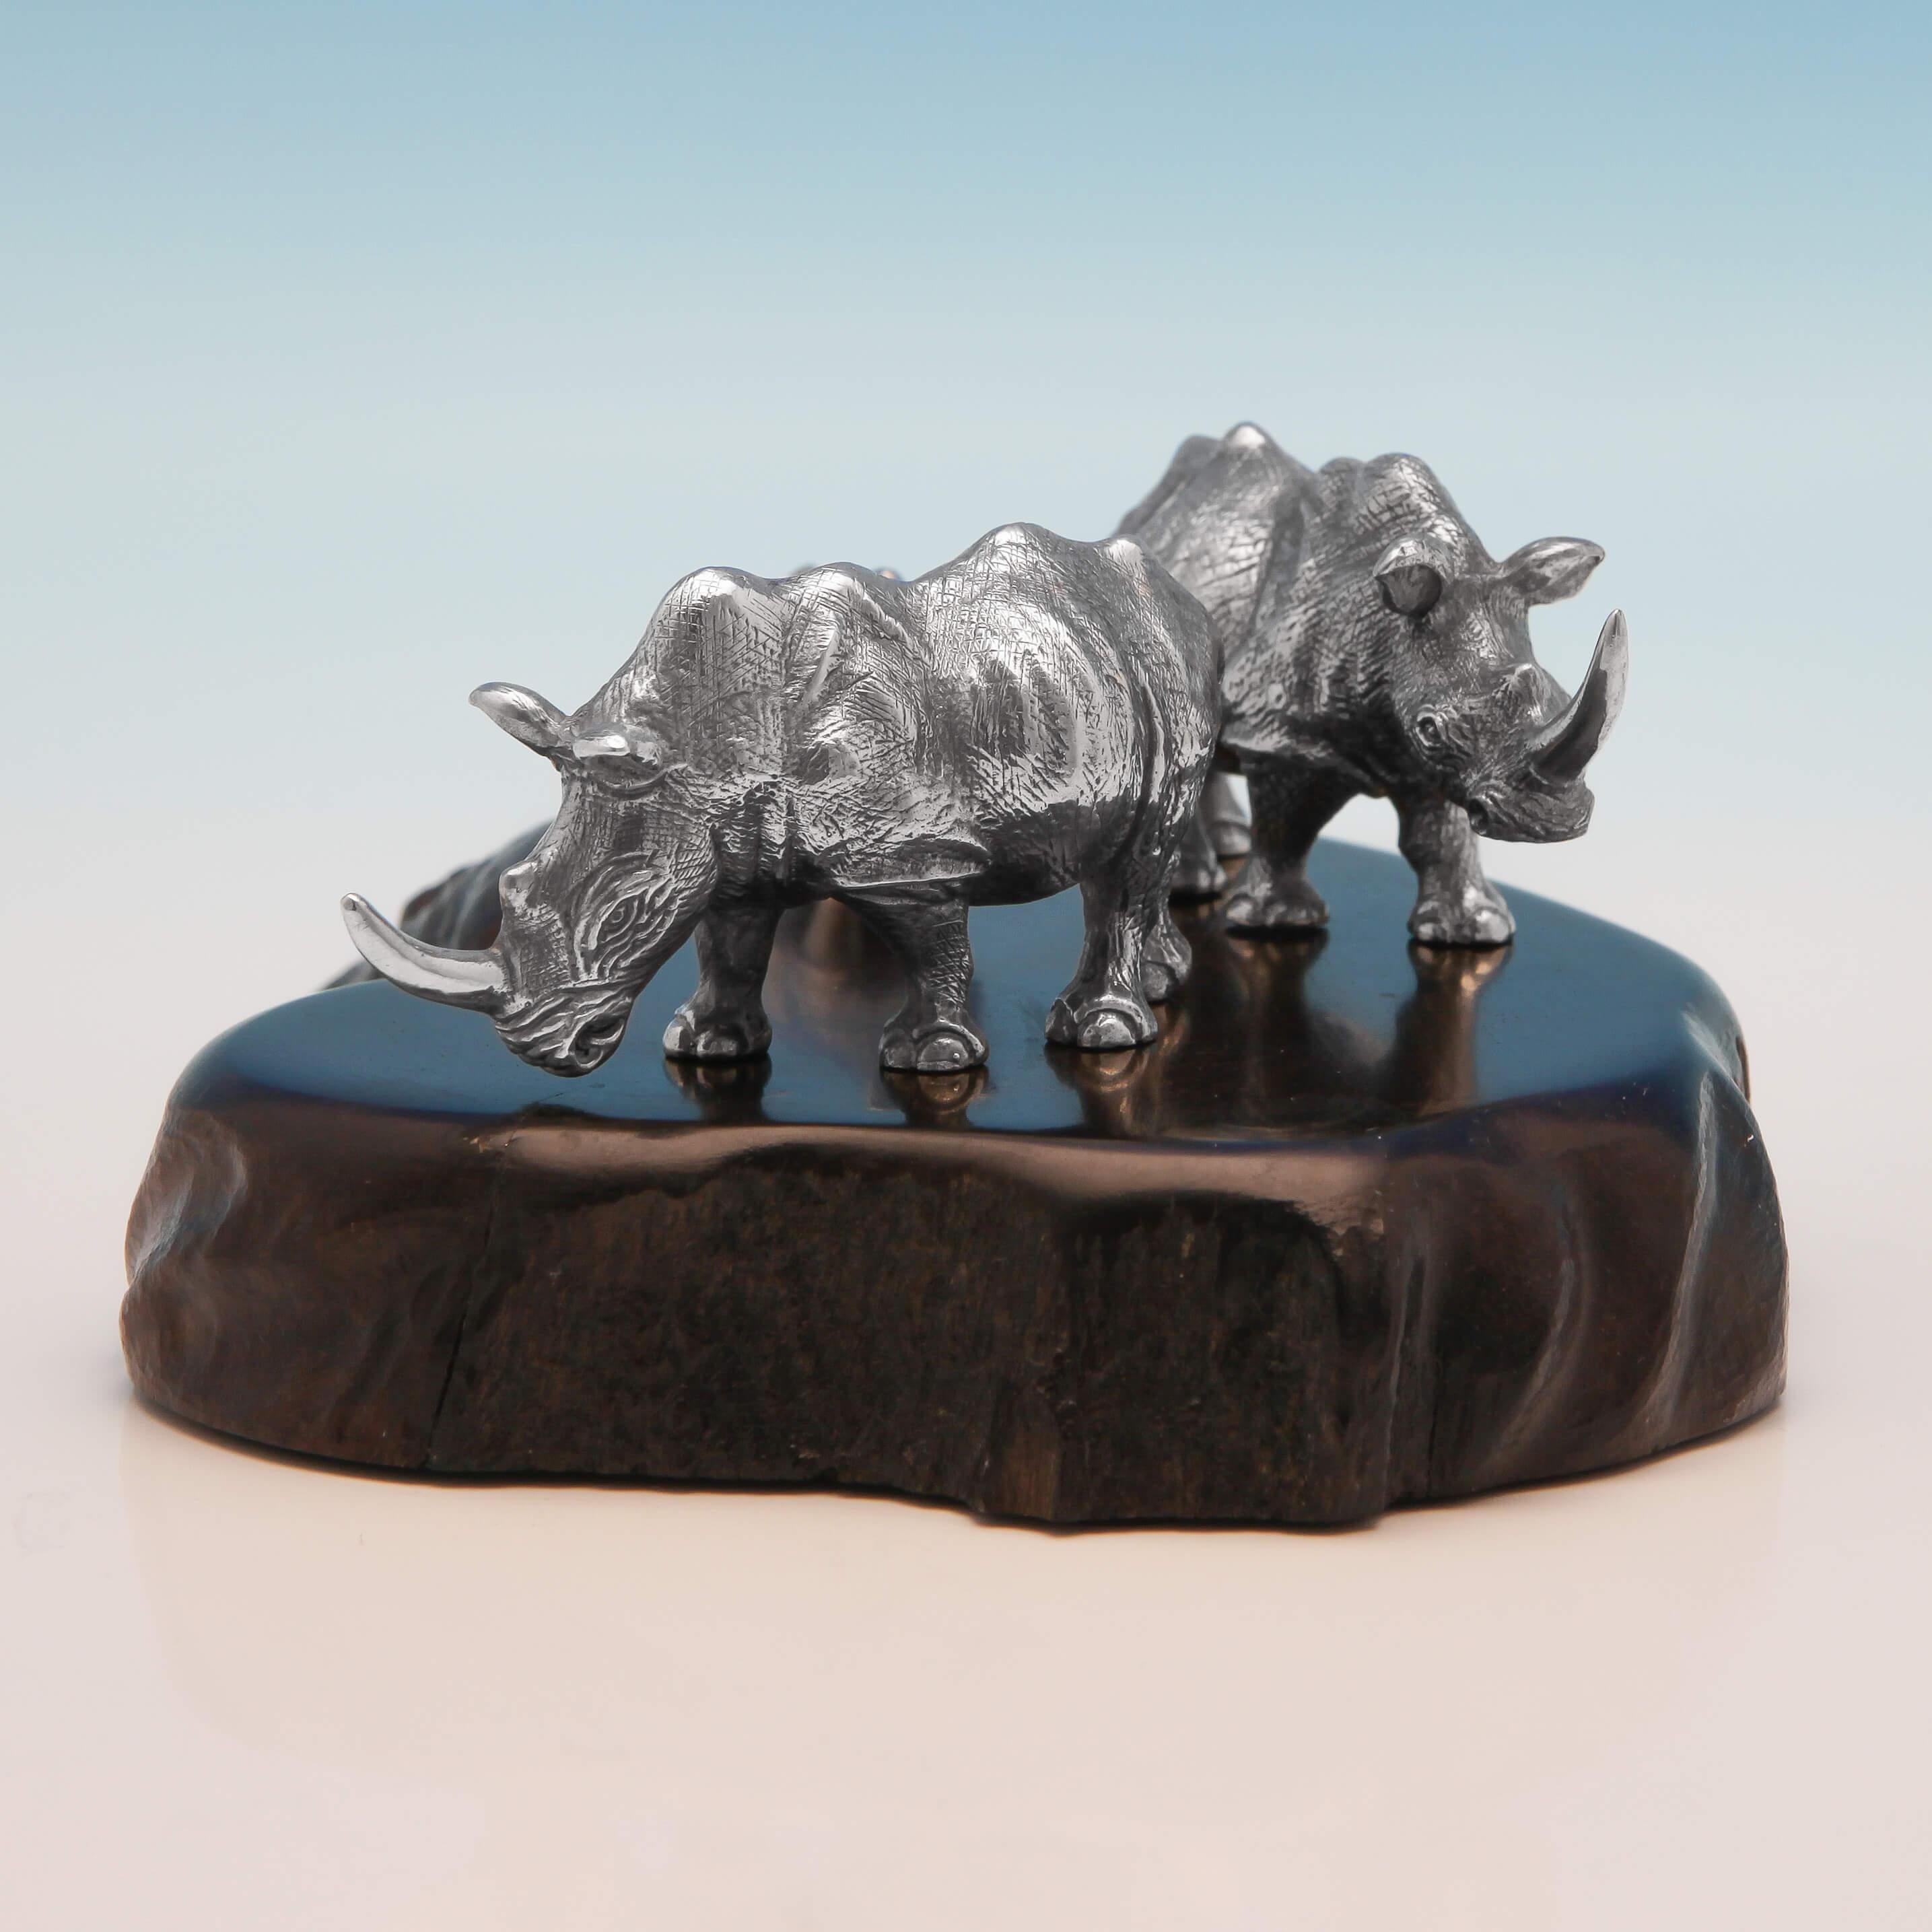 Hallmarked in 1997 by Patrick Mavros, this fabulous sterling silver set of three Rhinoceroses, stand on an African blackwood base and are realistically modelled. The base measures 6